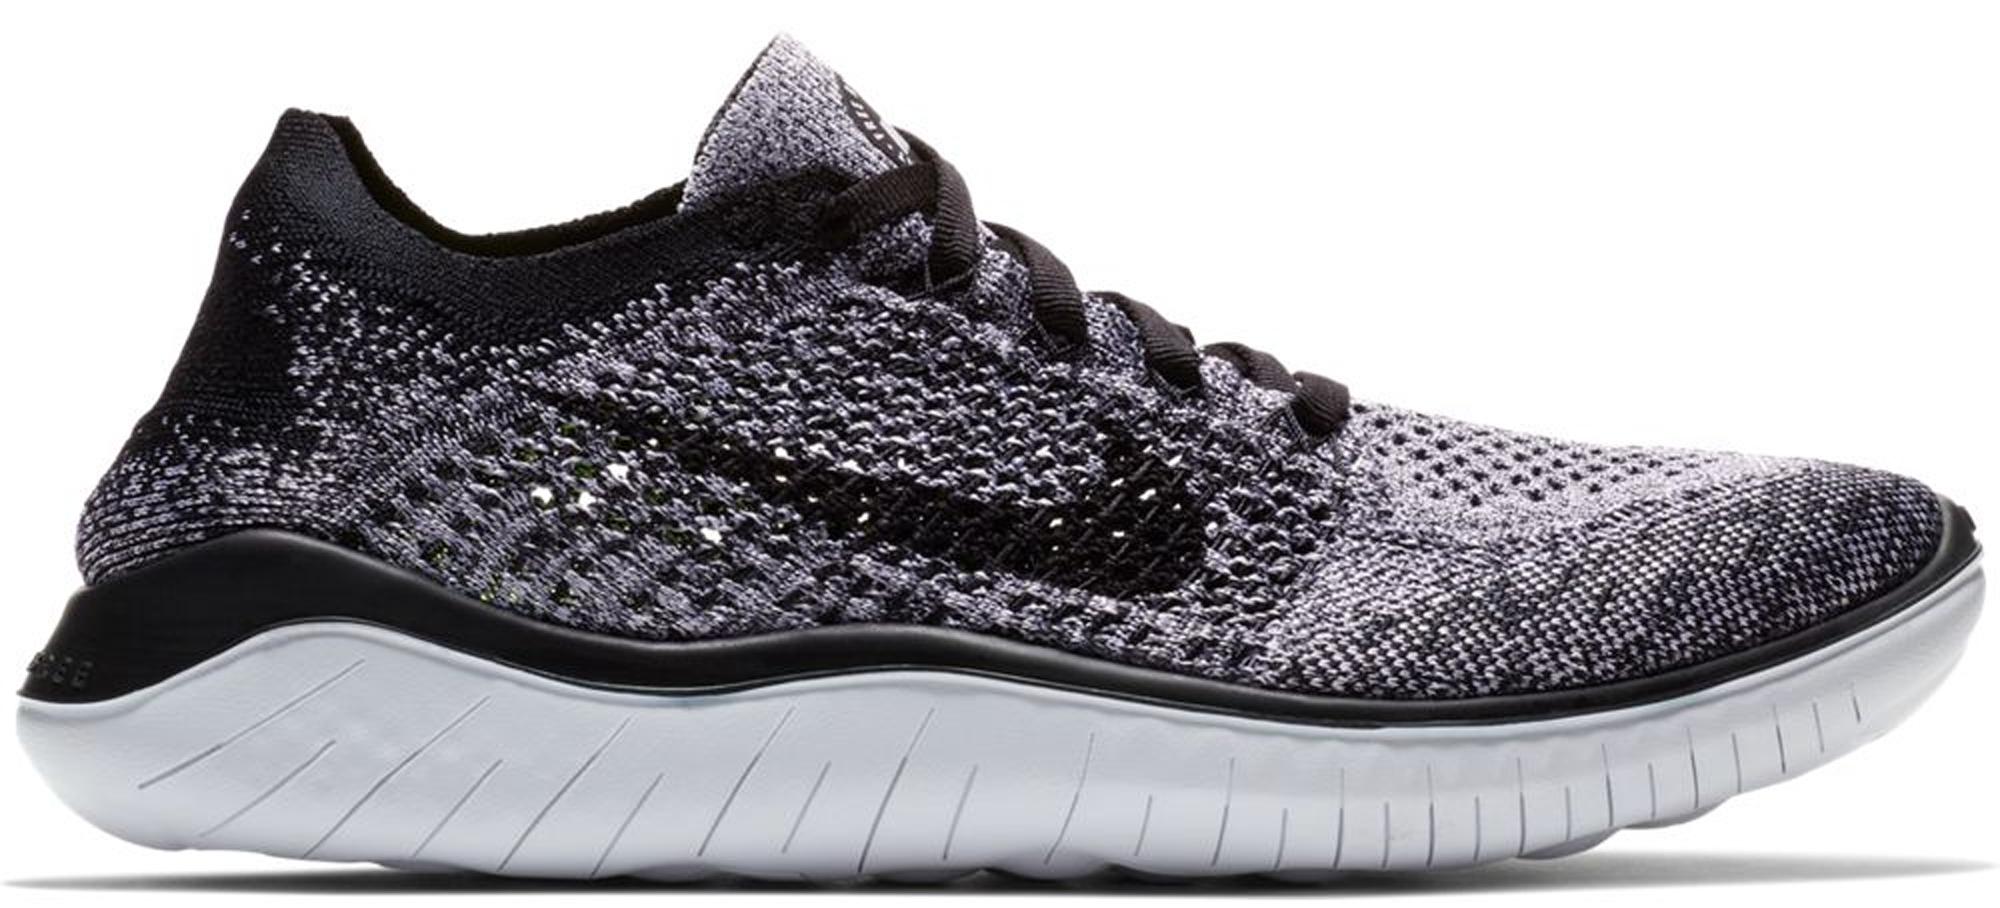 nike womens free rn flyknit 2018 running shoes